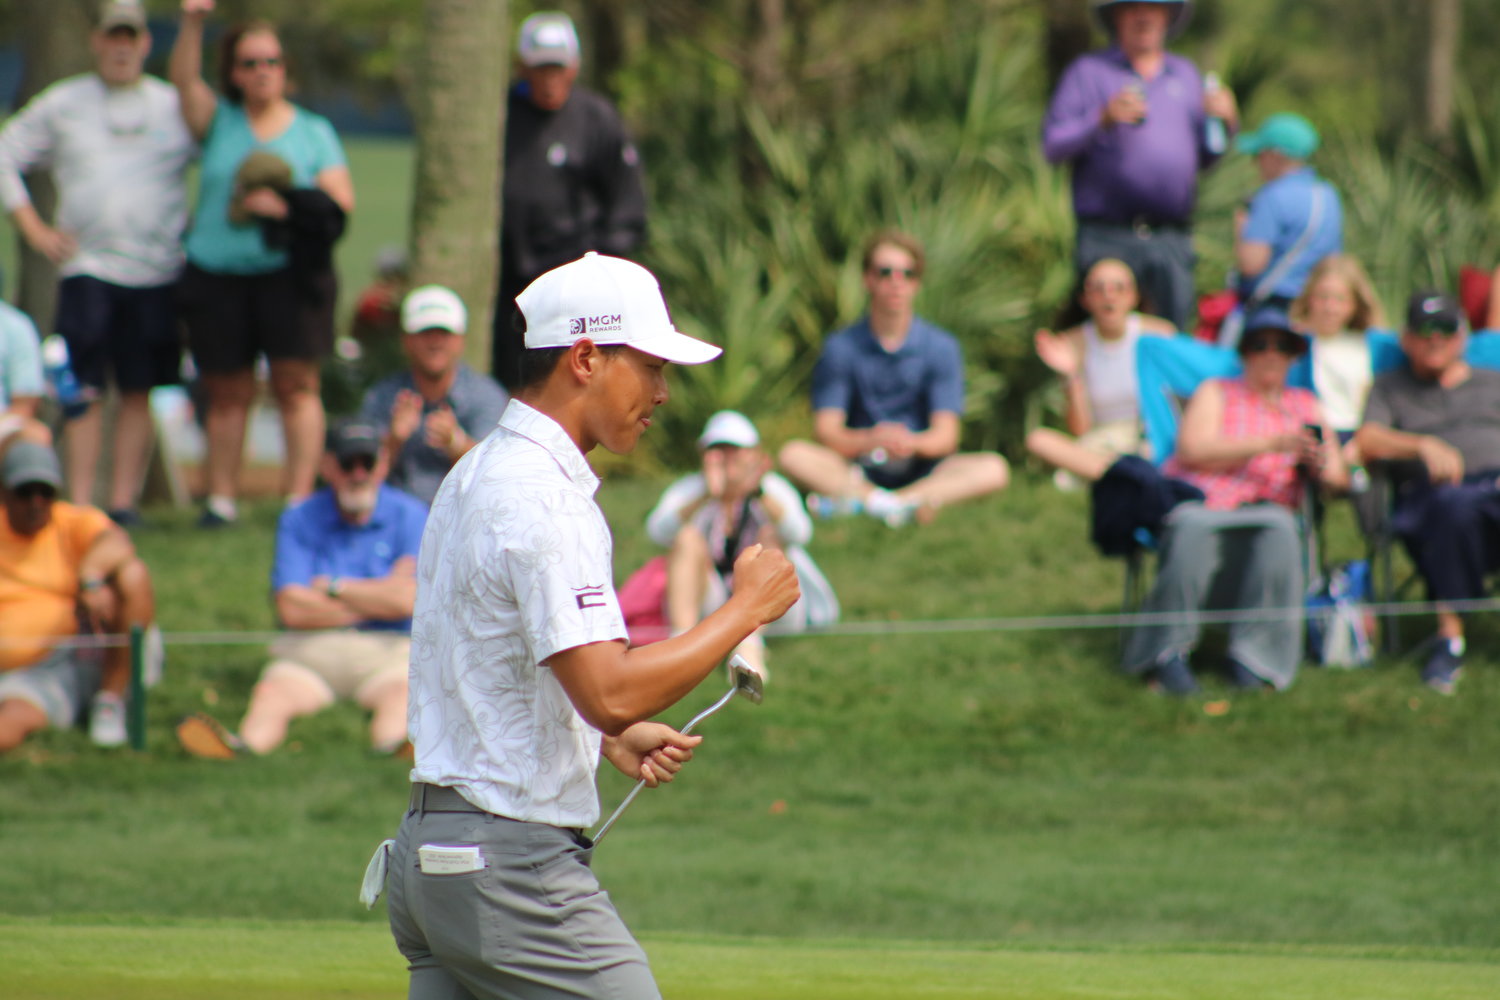 Justin Suh gives a fist pump to the crowd after a birdie putt on No. 5 to get to 4-under.